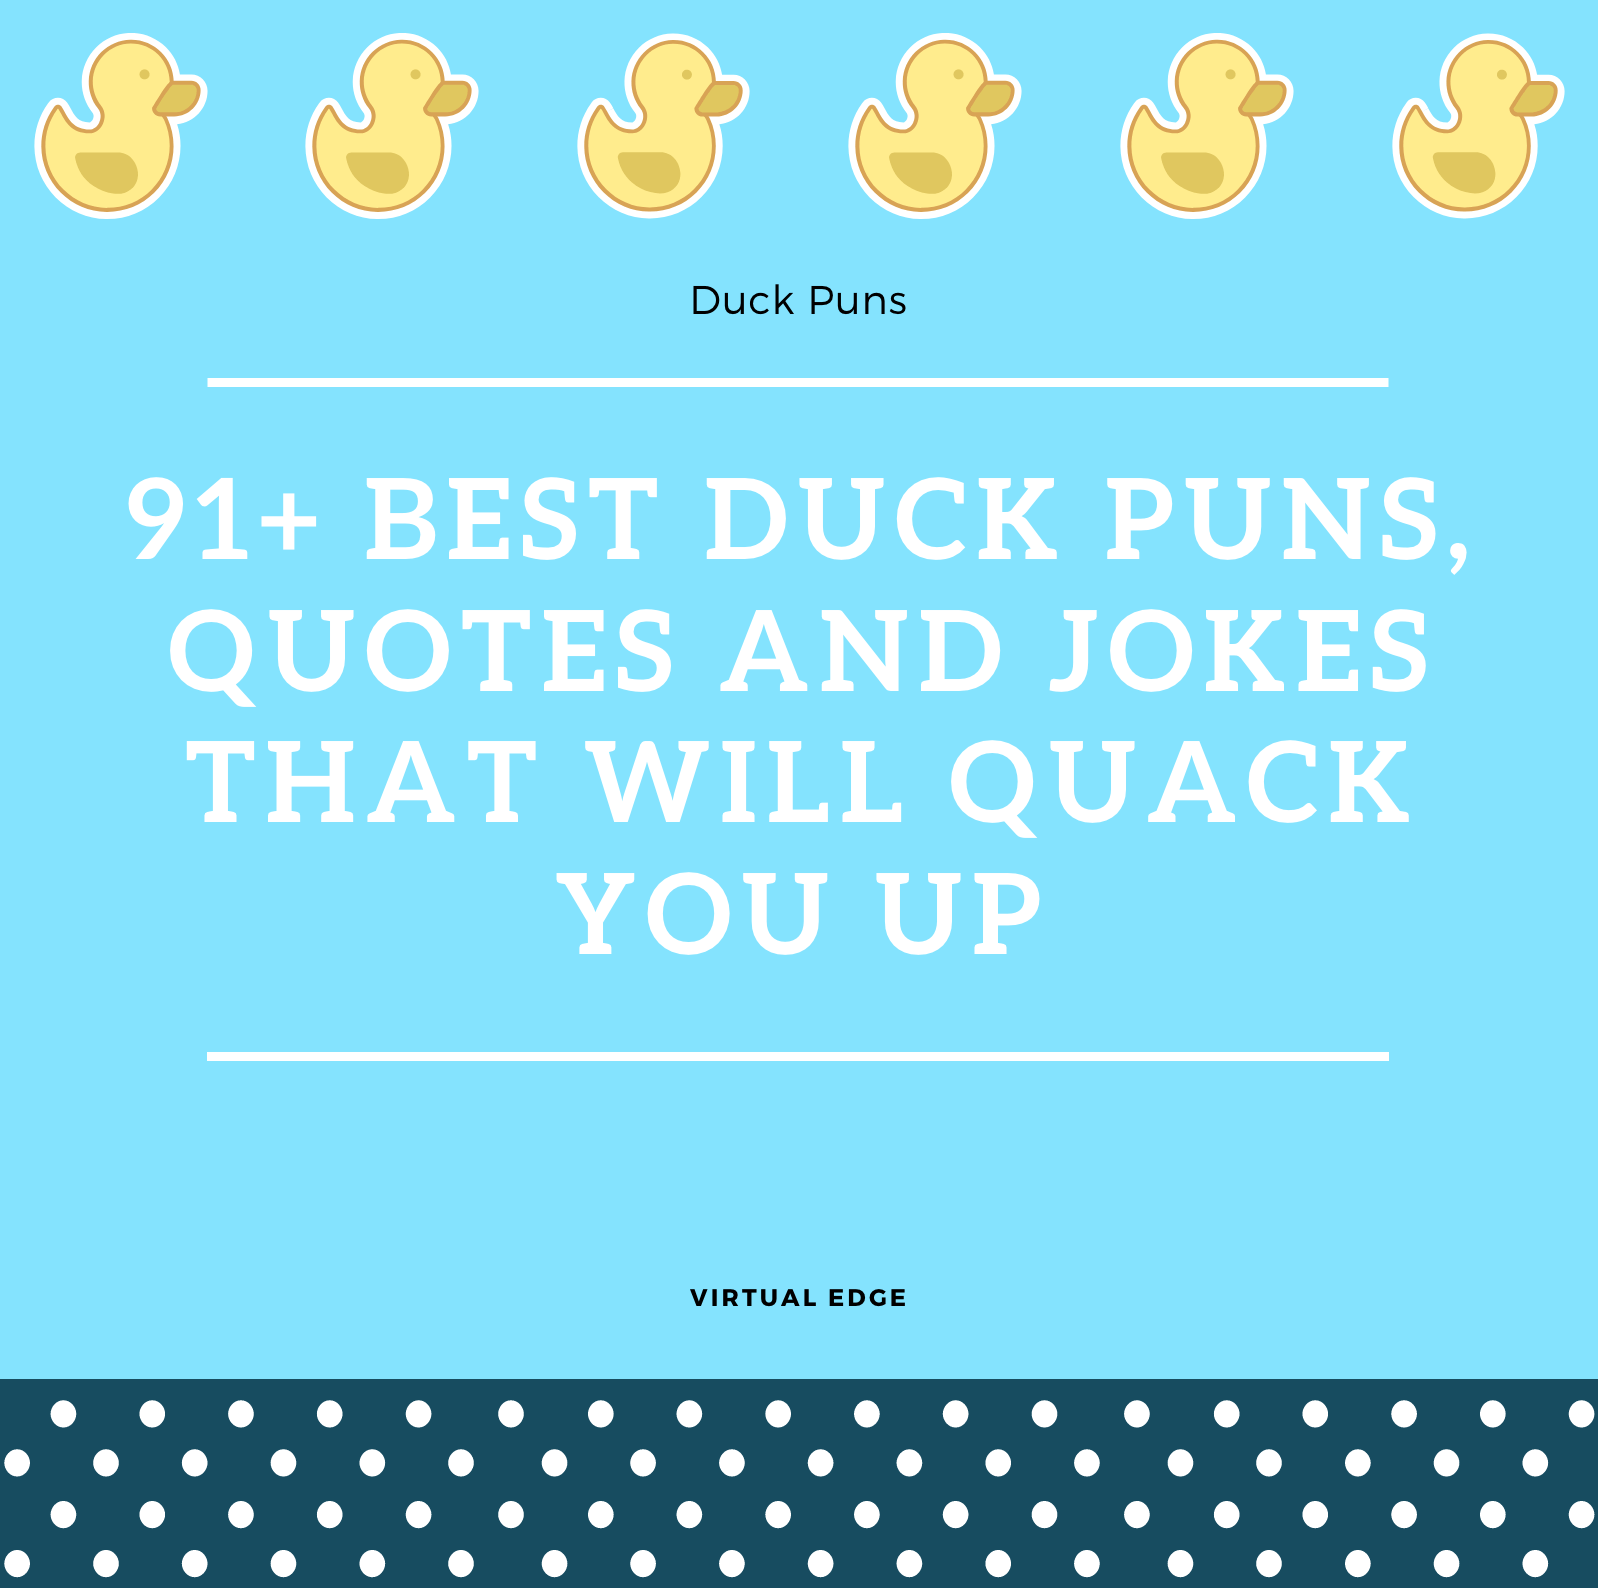 91+ Best Duck Puns, Quotes and Jokes That Will Quack You Up